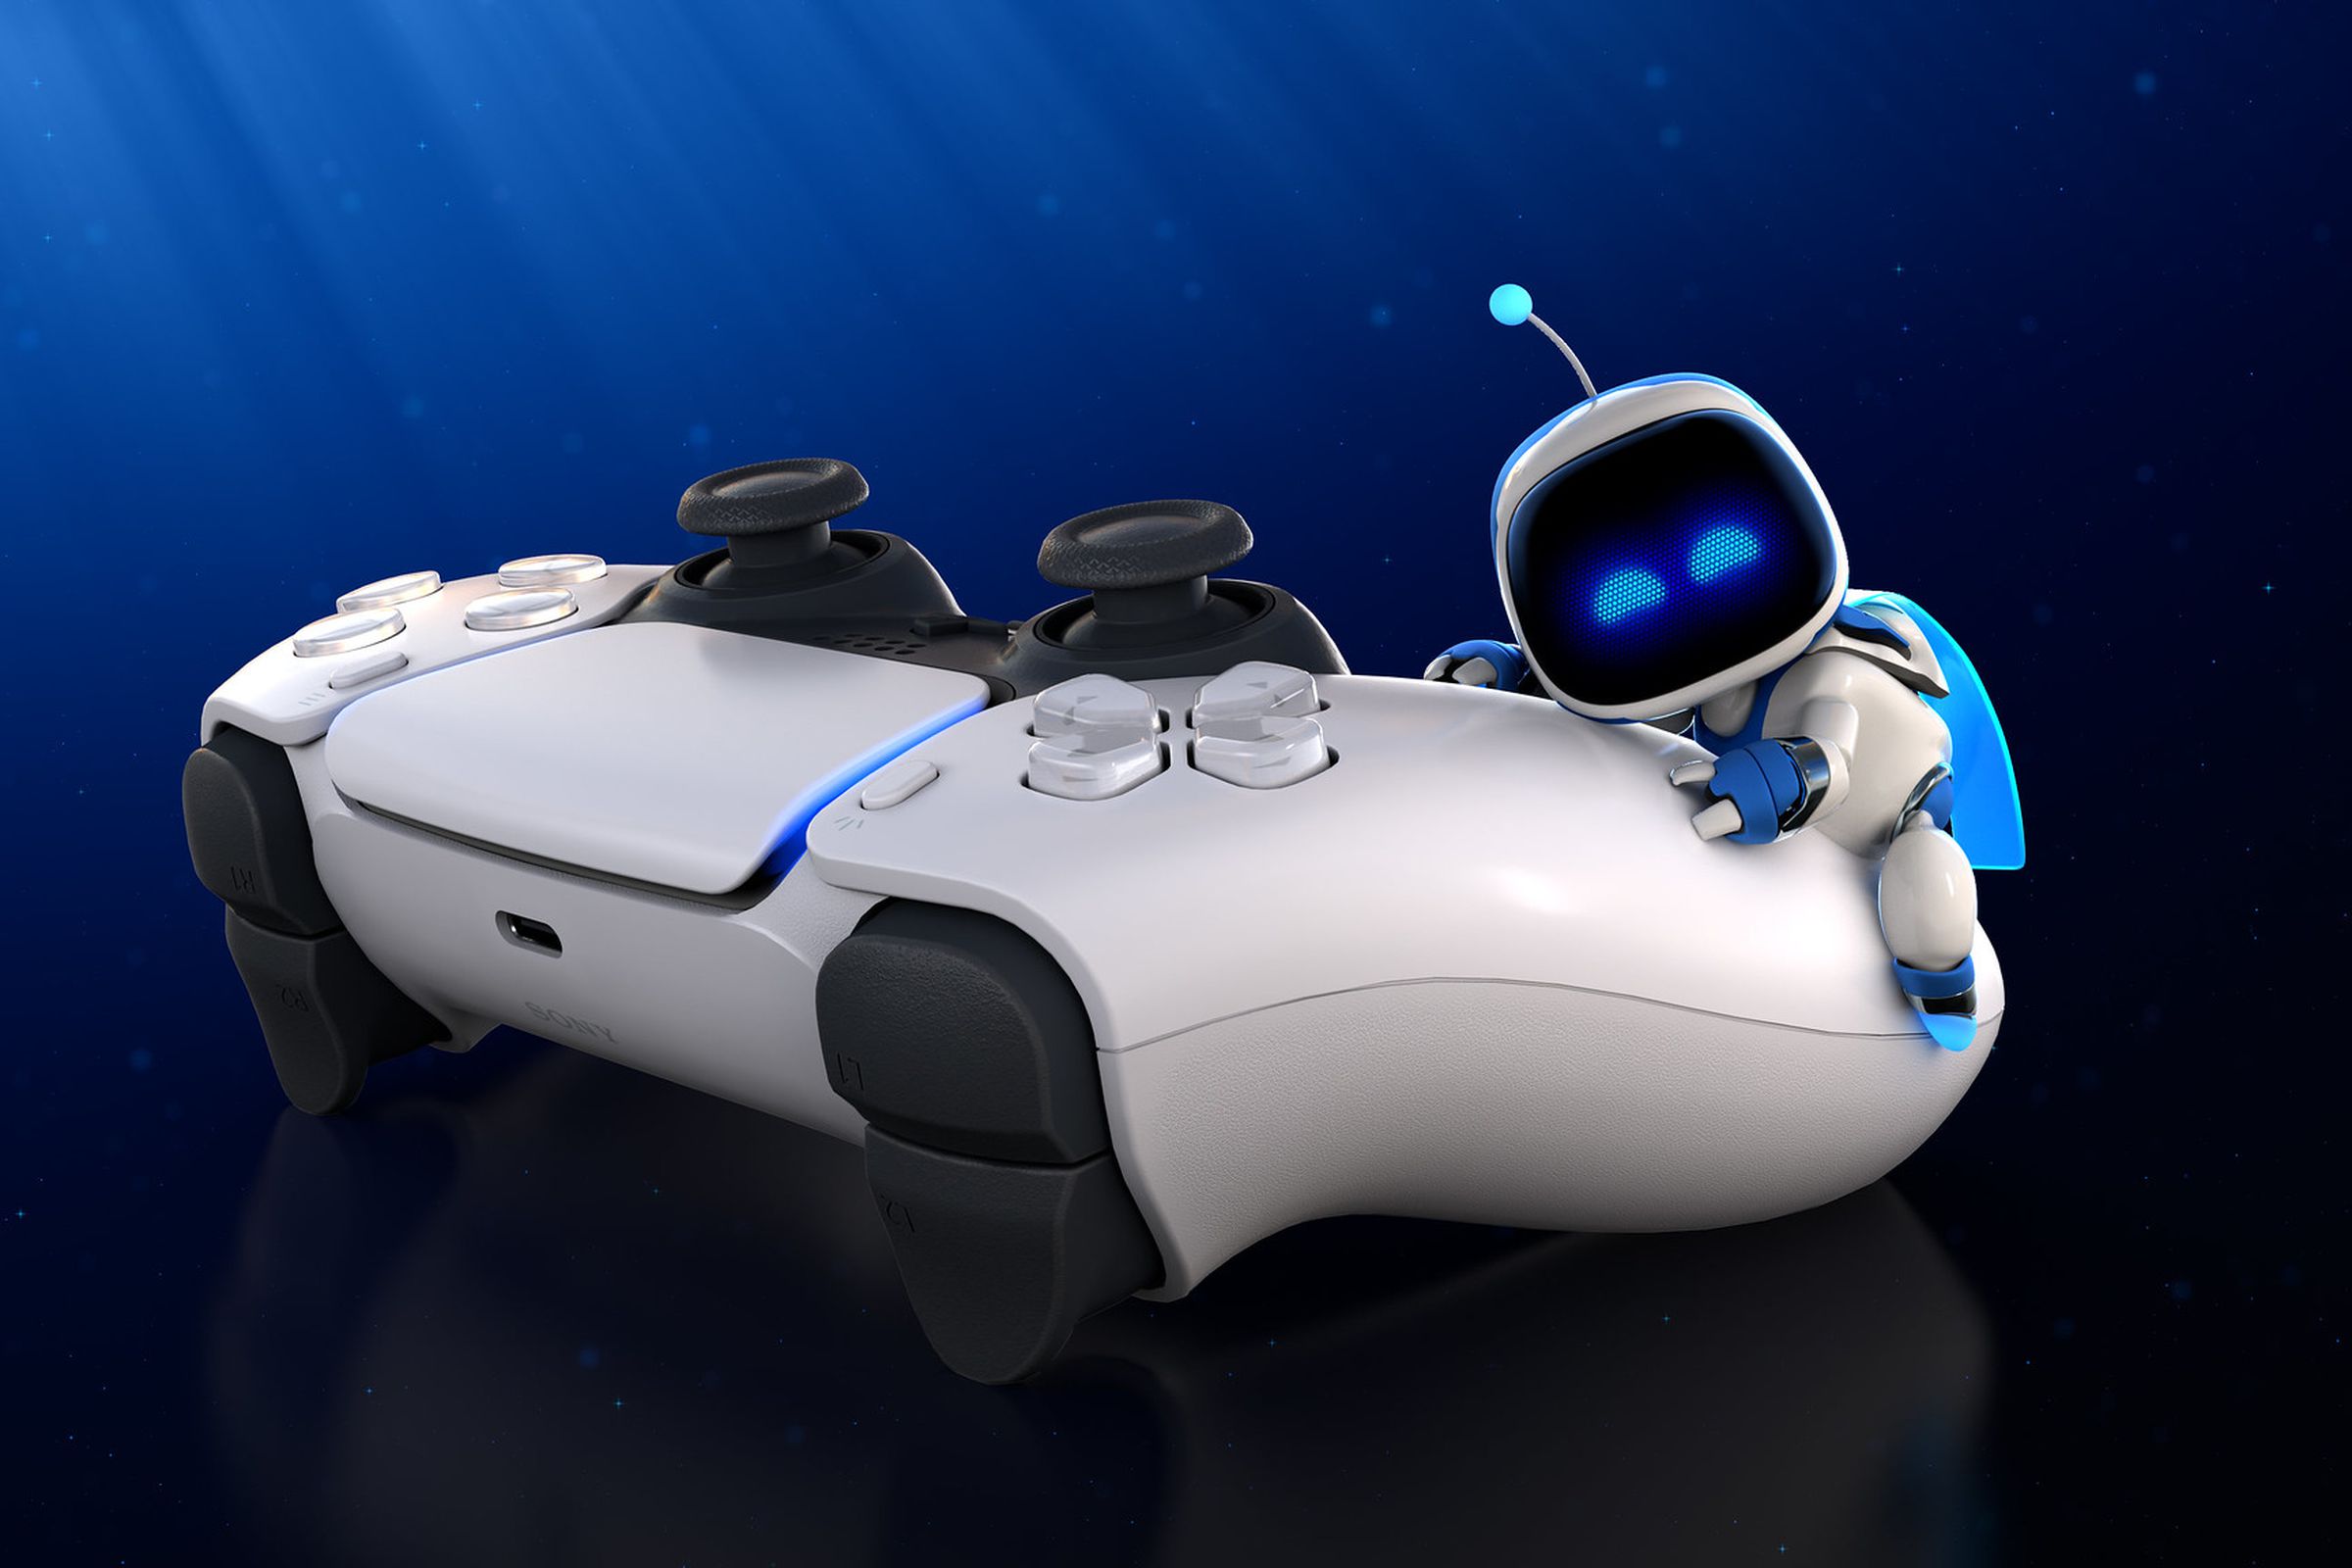 Promotional art featuring Astro Bot and a PS5 DualSense controller.